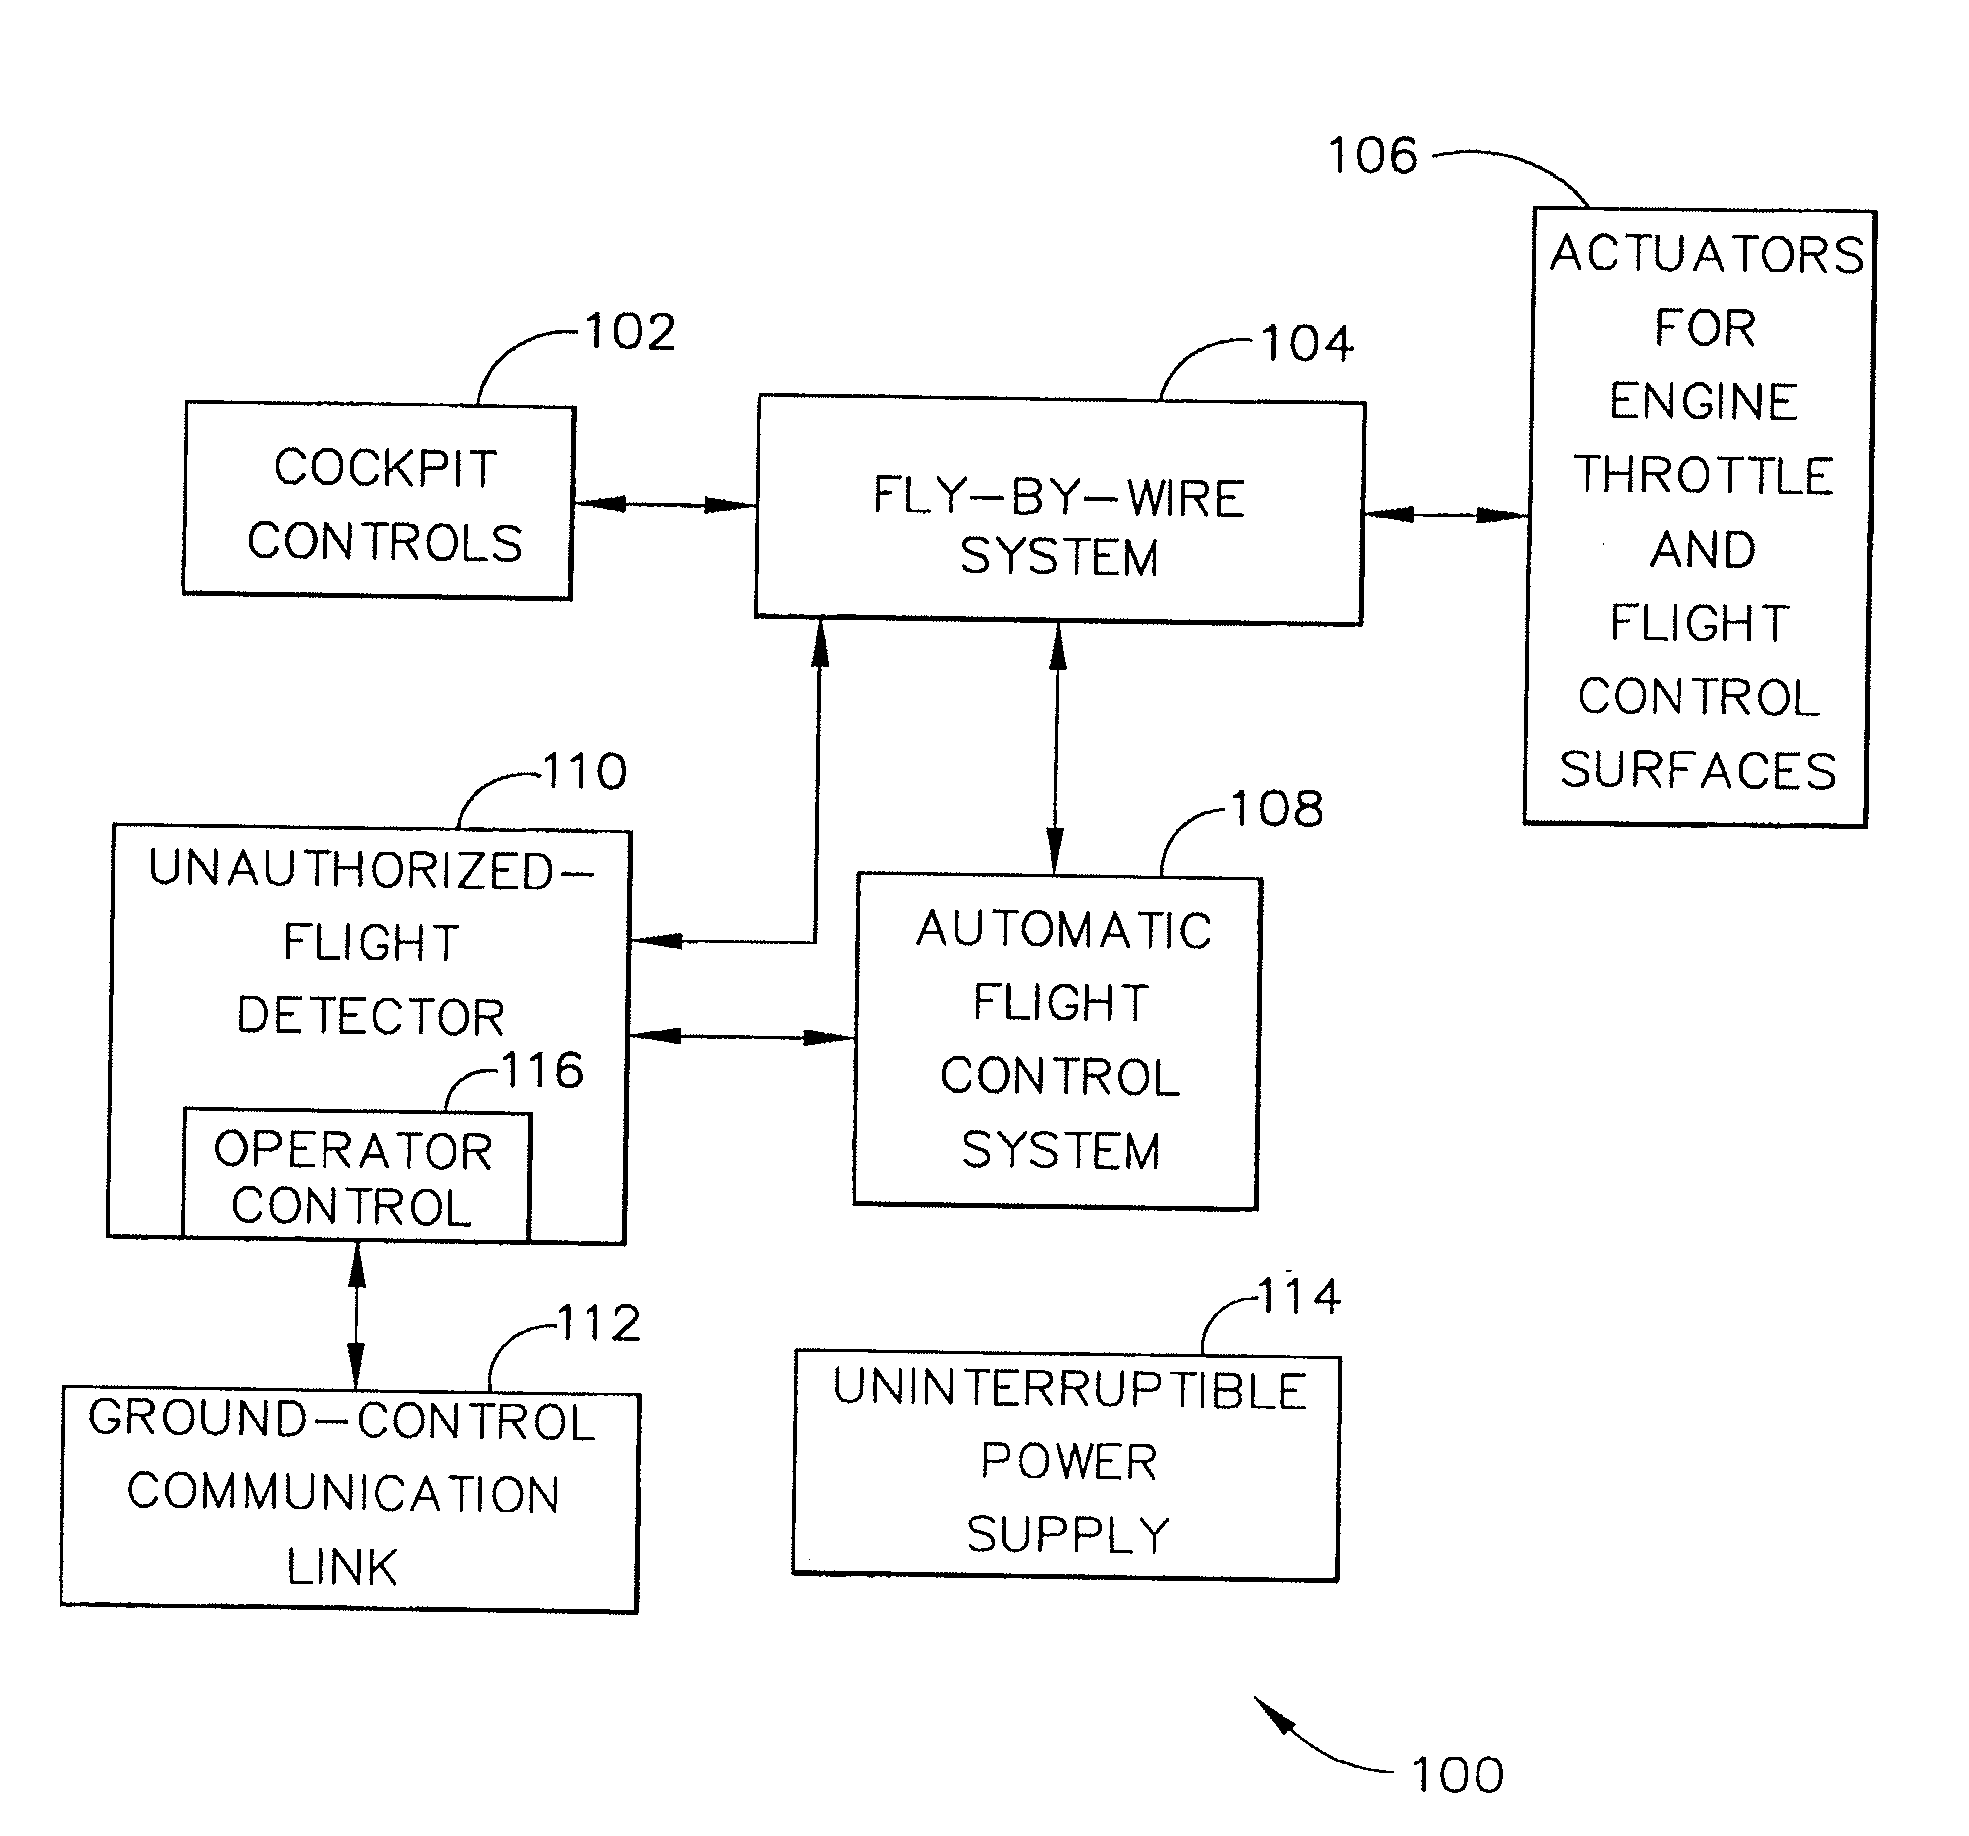 Method and apparatus for preventing an unauthorized flight of an aircraft